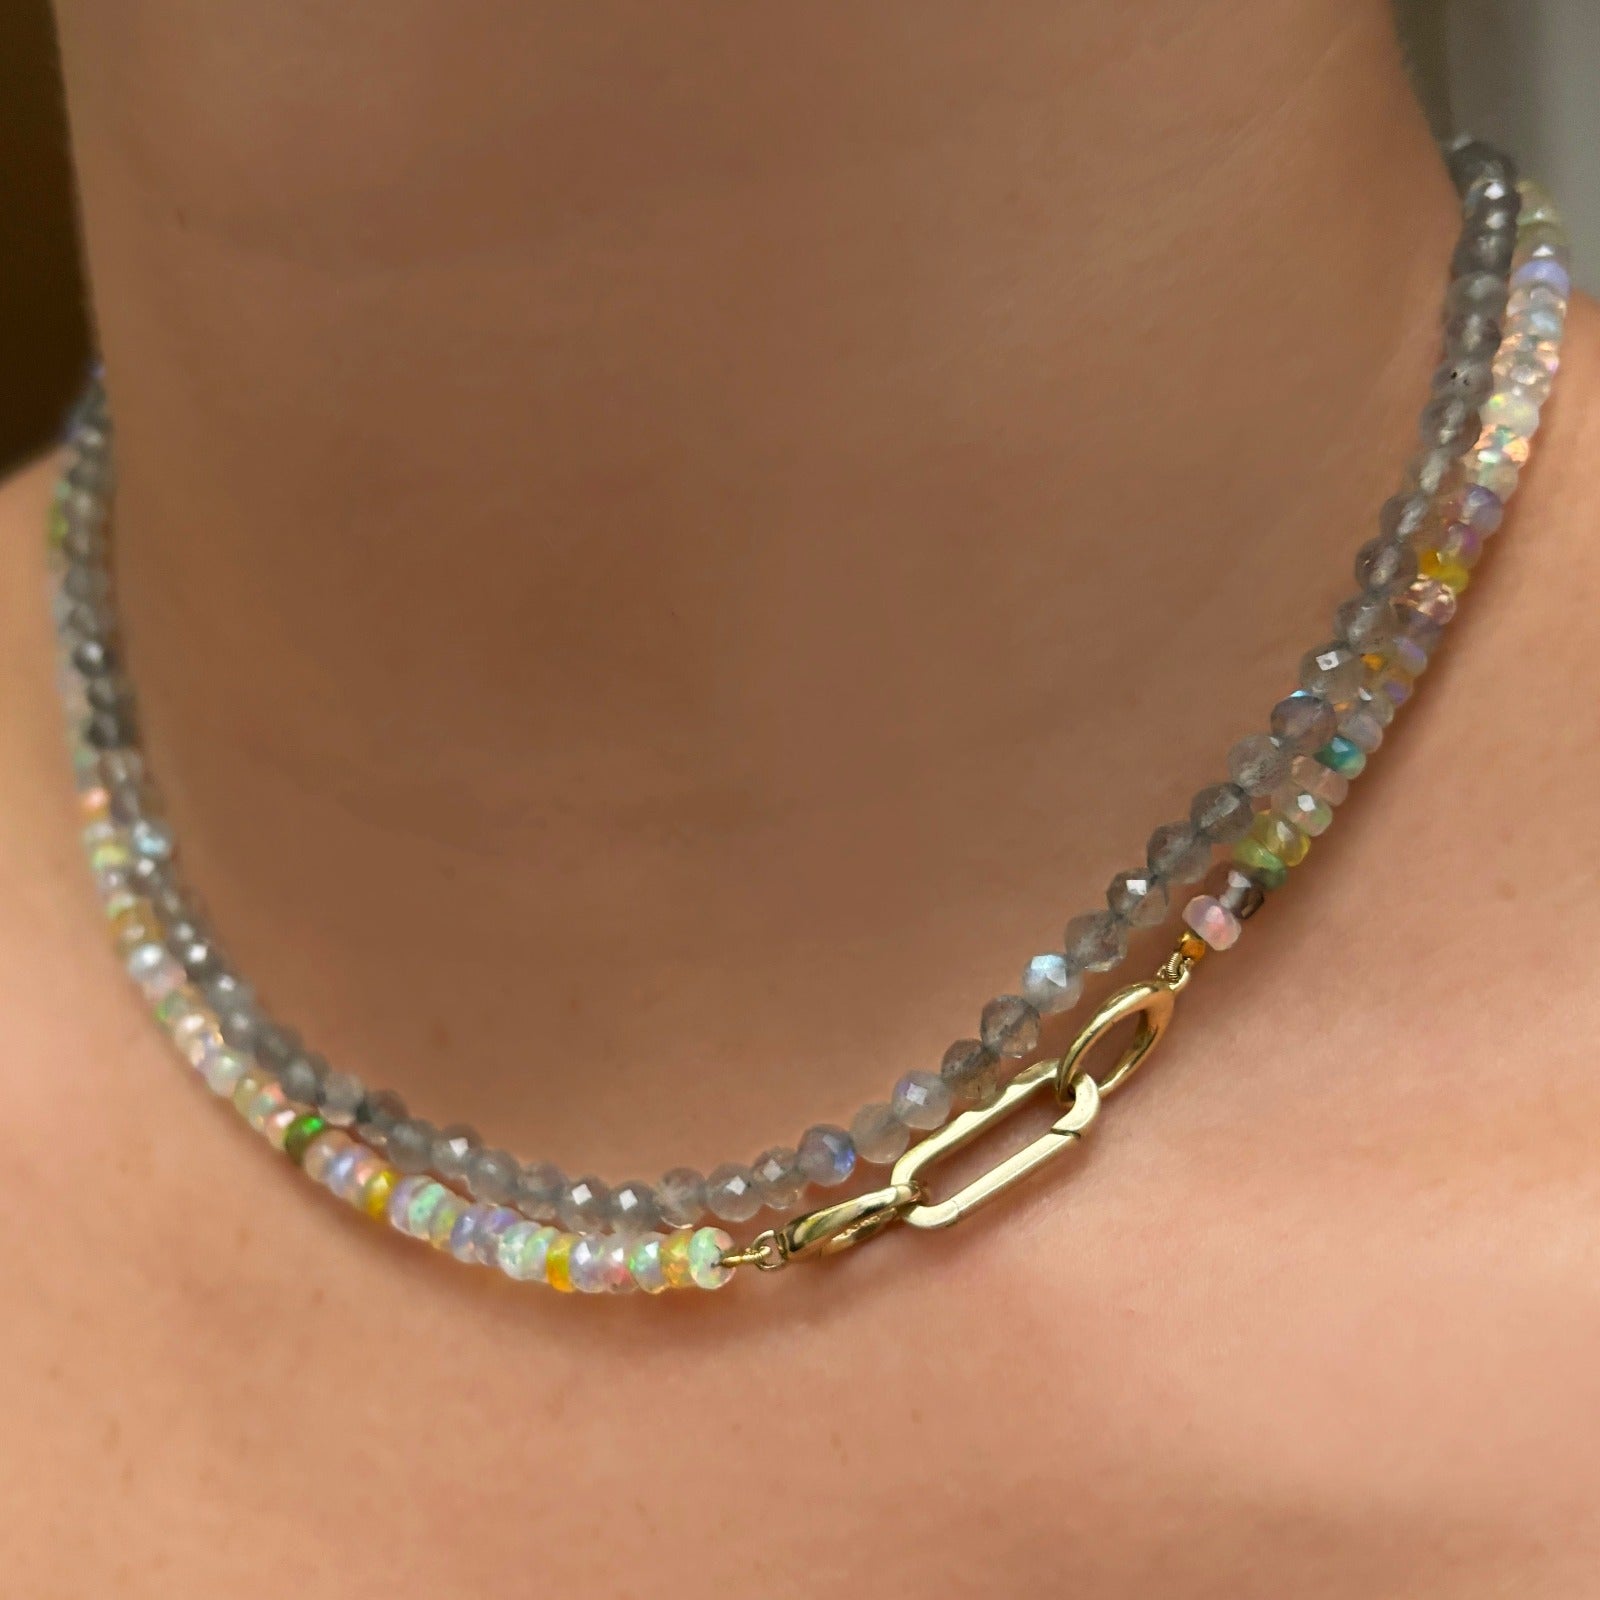 14k yellow gold oval locking charm styled on a neck locked onto oval clasps of a beaded necklace.